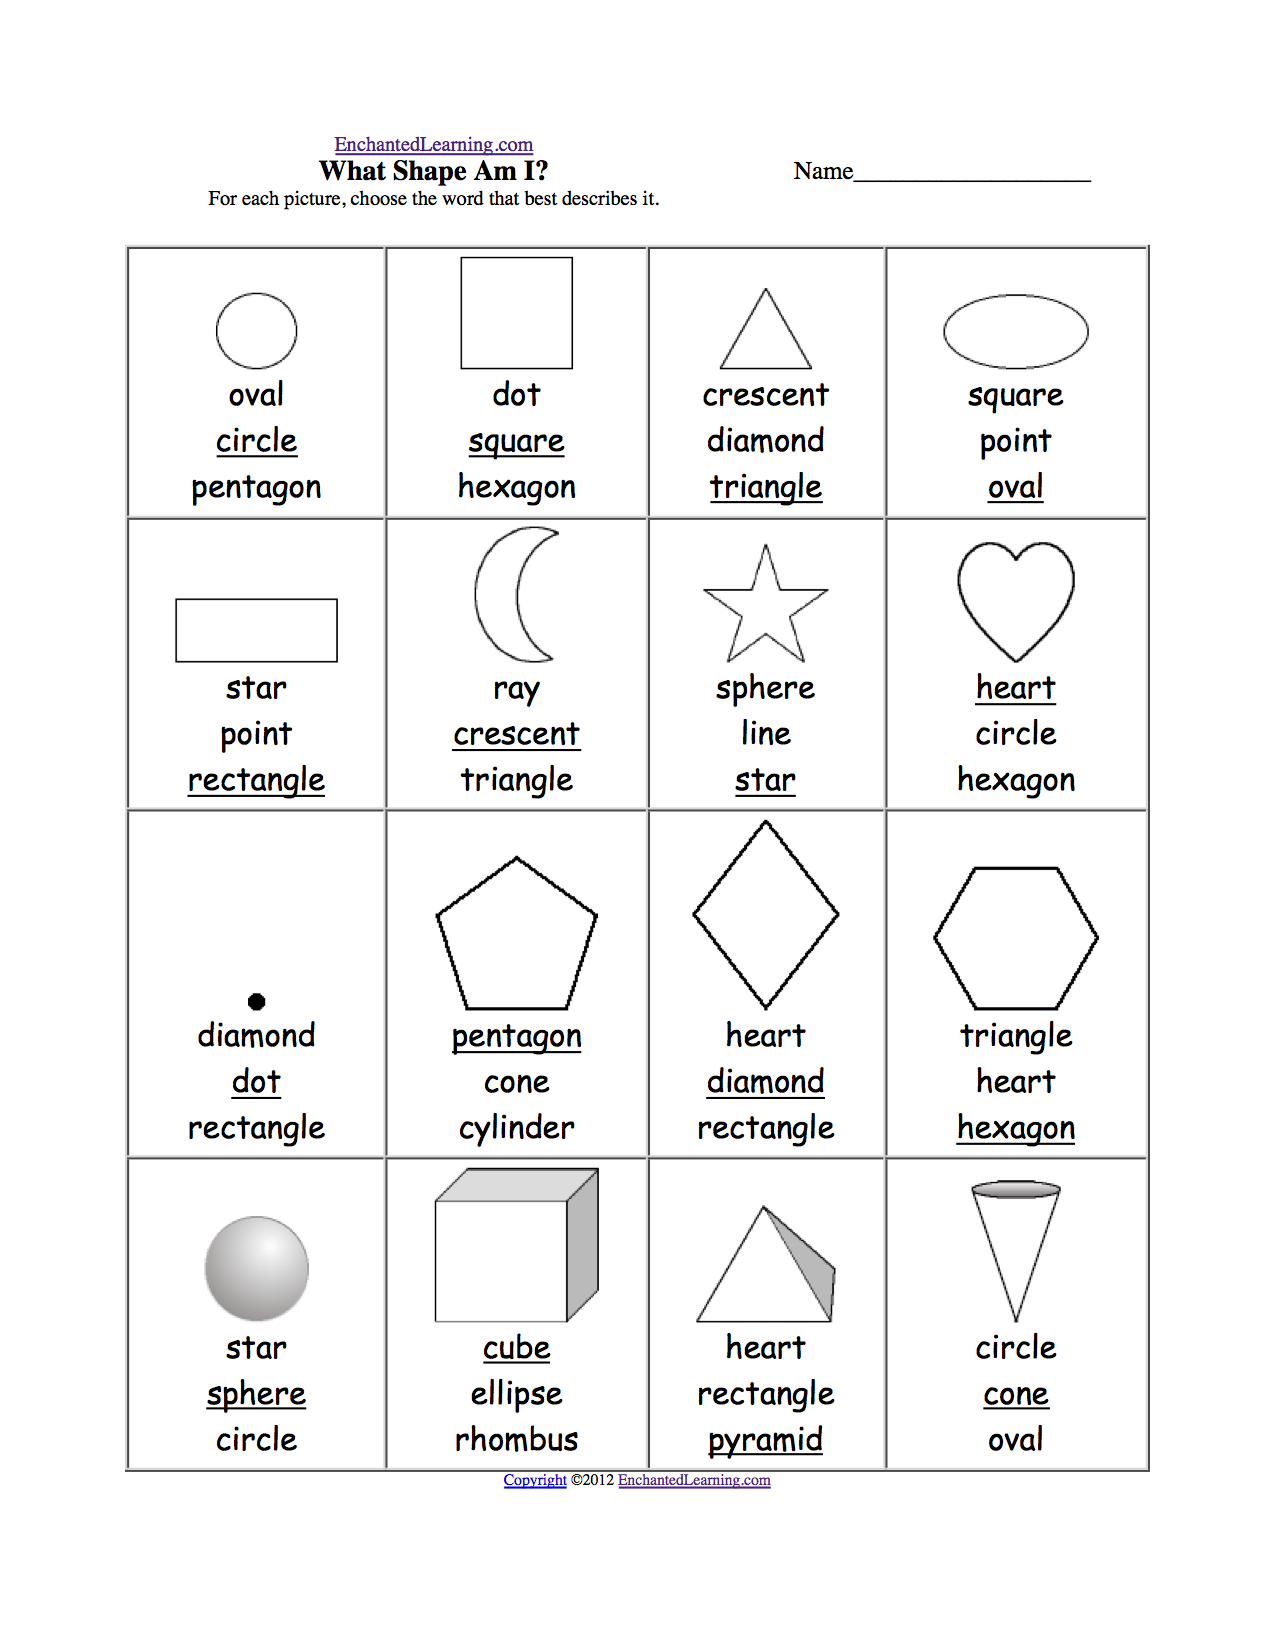 Shapes, Colors, and Sizes Spelling Quiz Worksheet for 1st - 2nd Grade